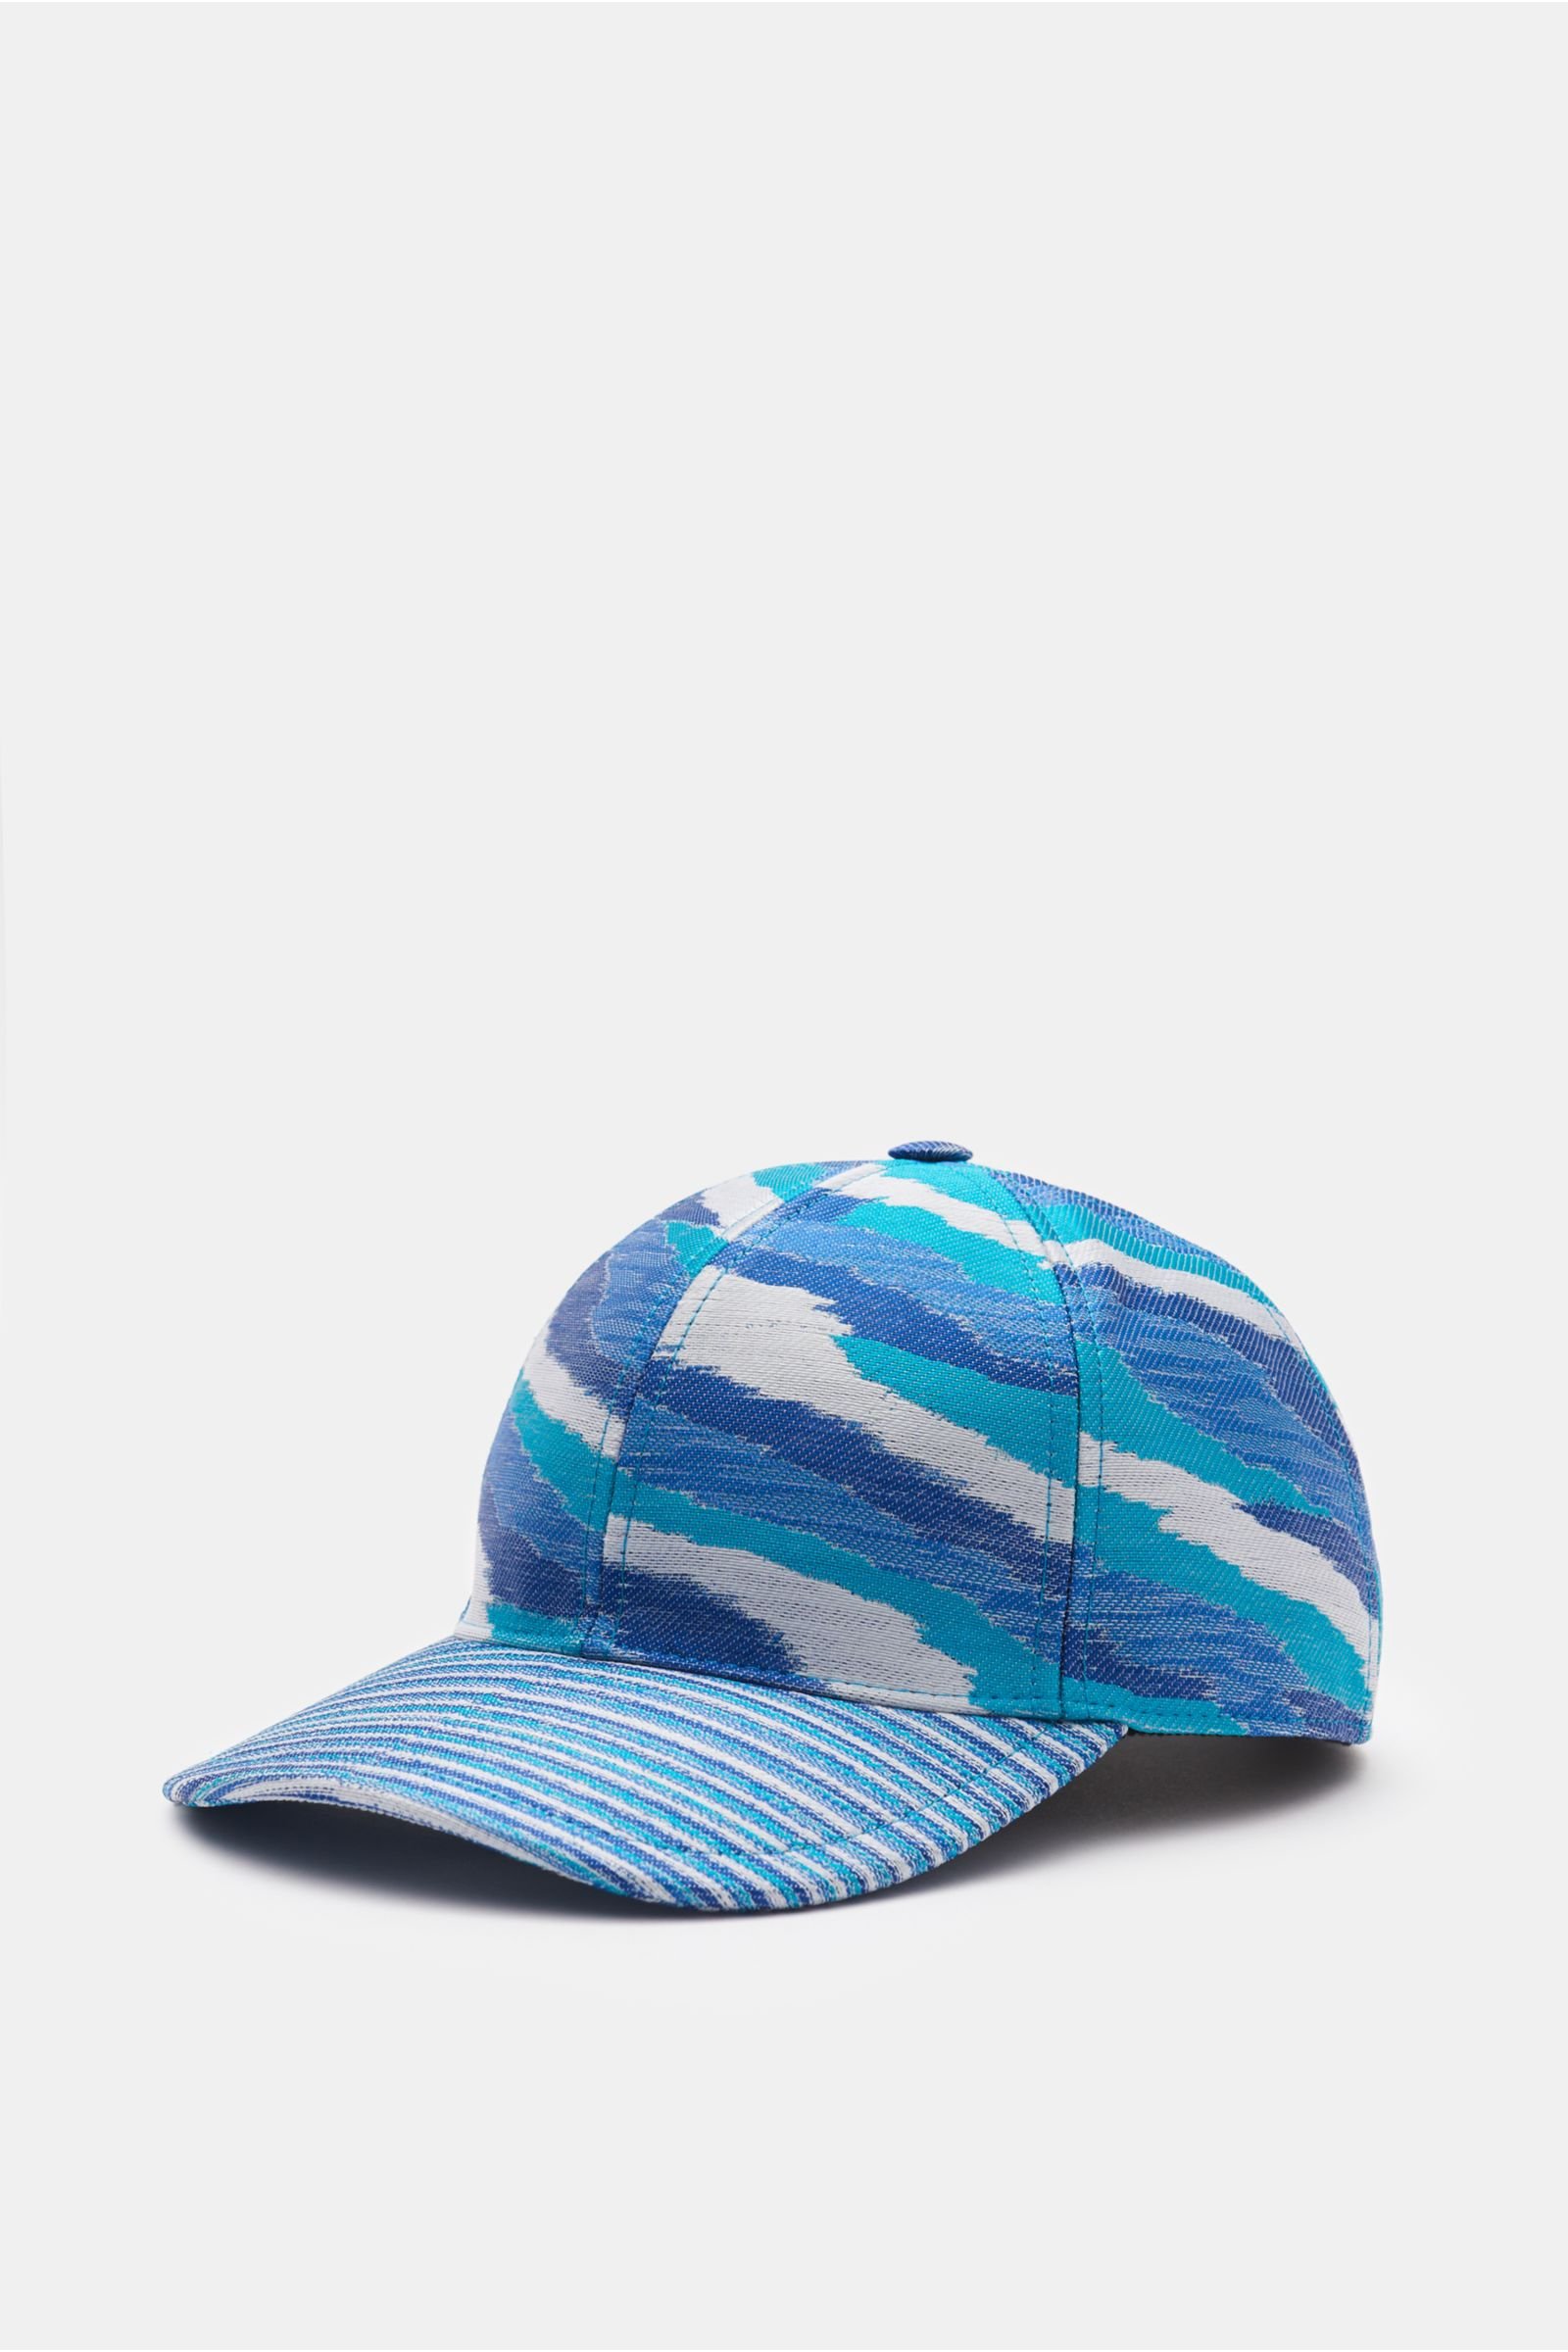 Baseball cap off-white/blue/turquoise patterned